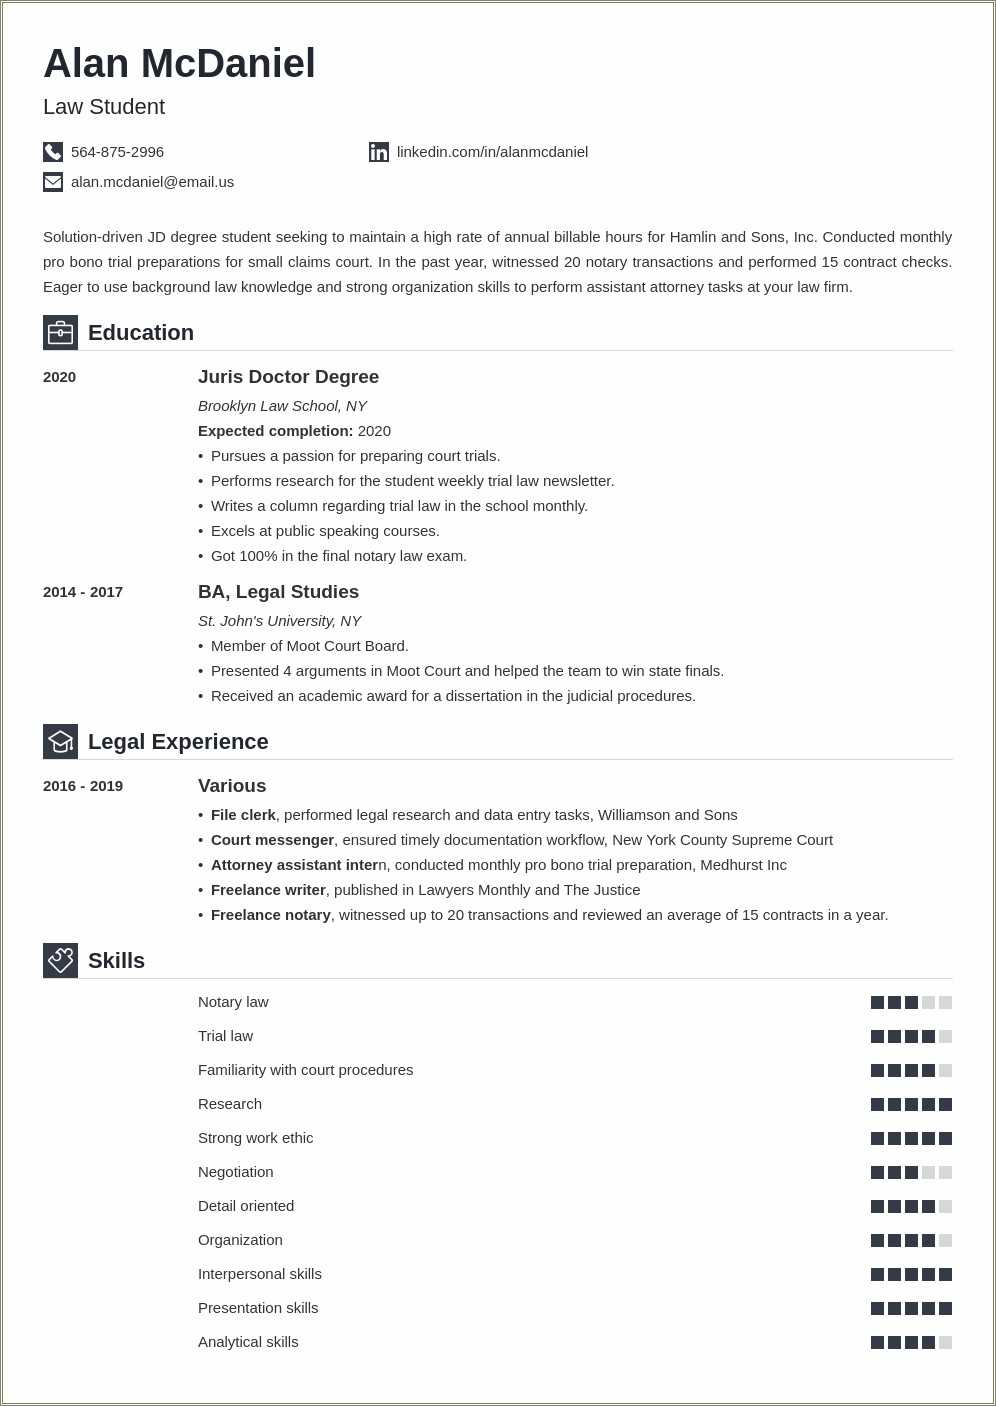 law-school-admission-resume-example-resume-example-gallery